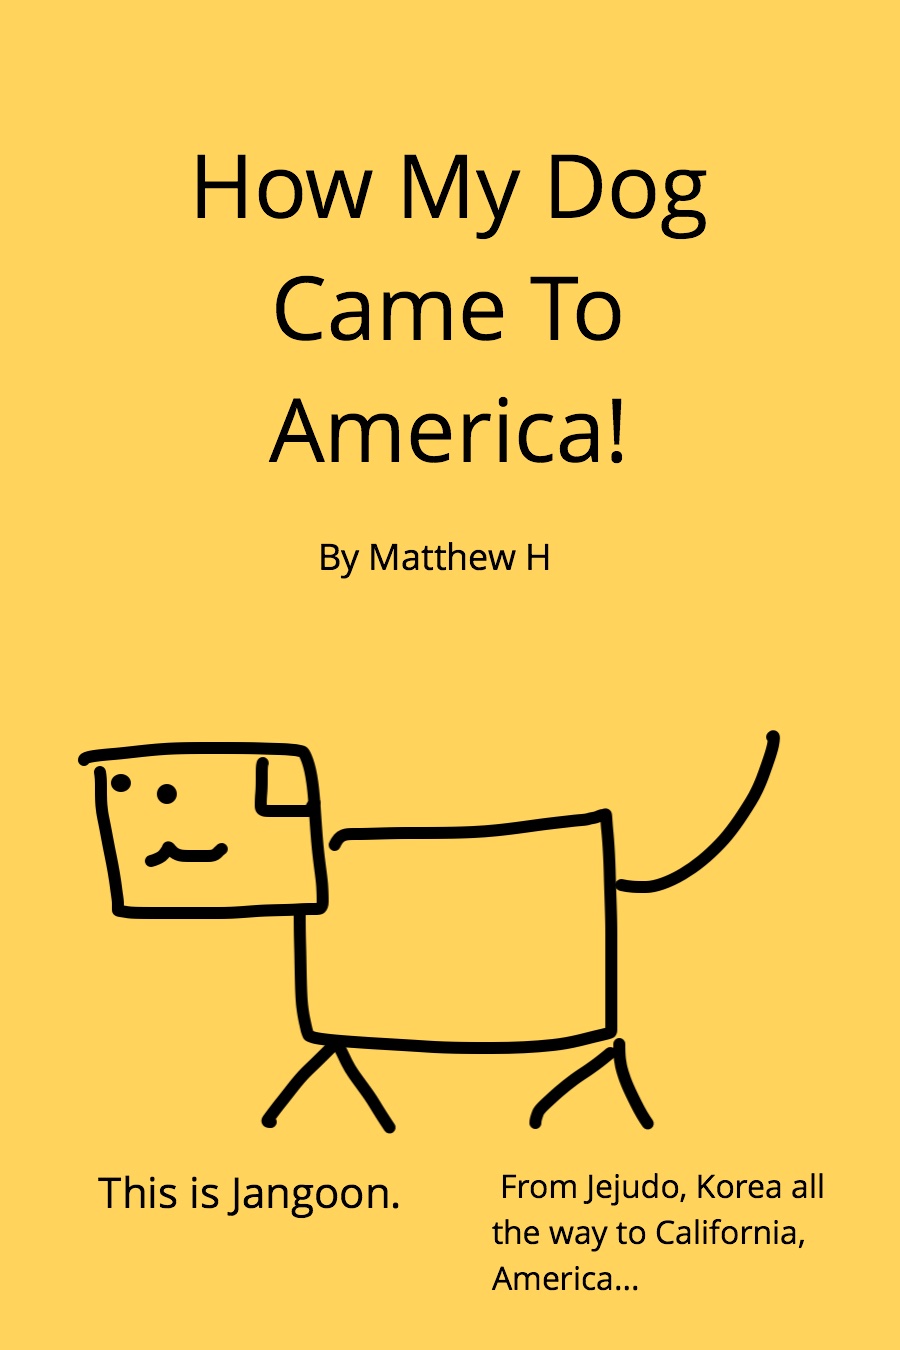 How My Dog Came To America by Matthew H